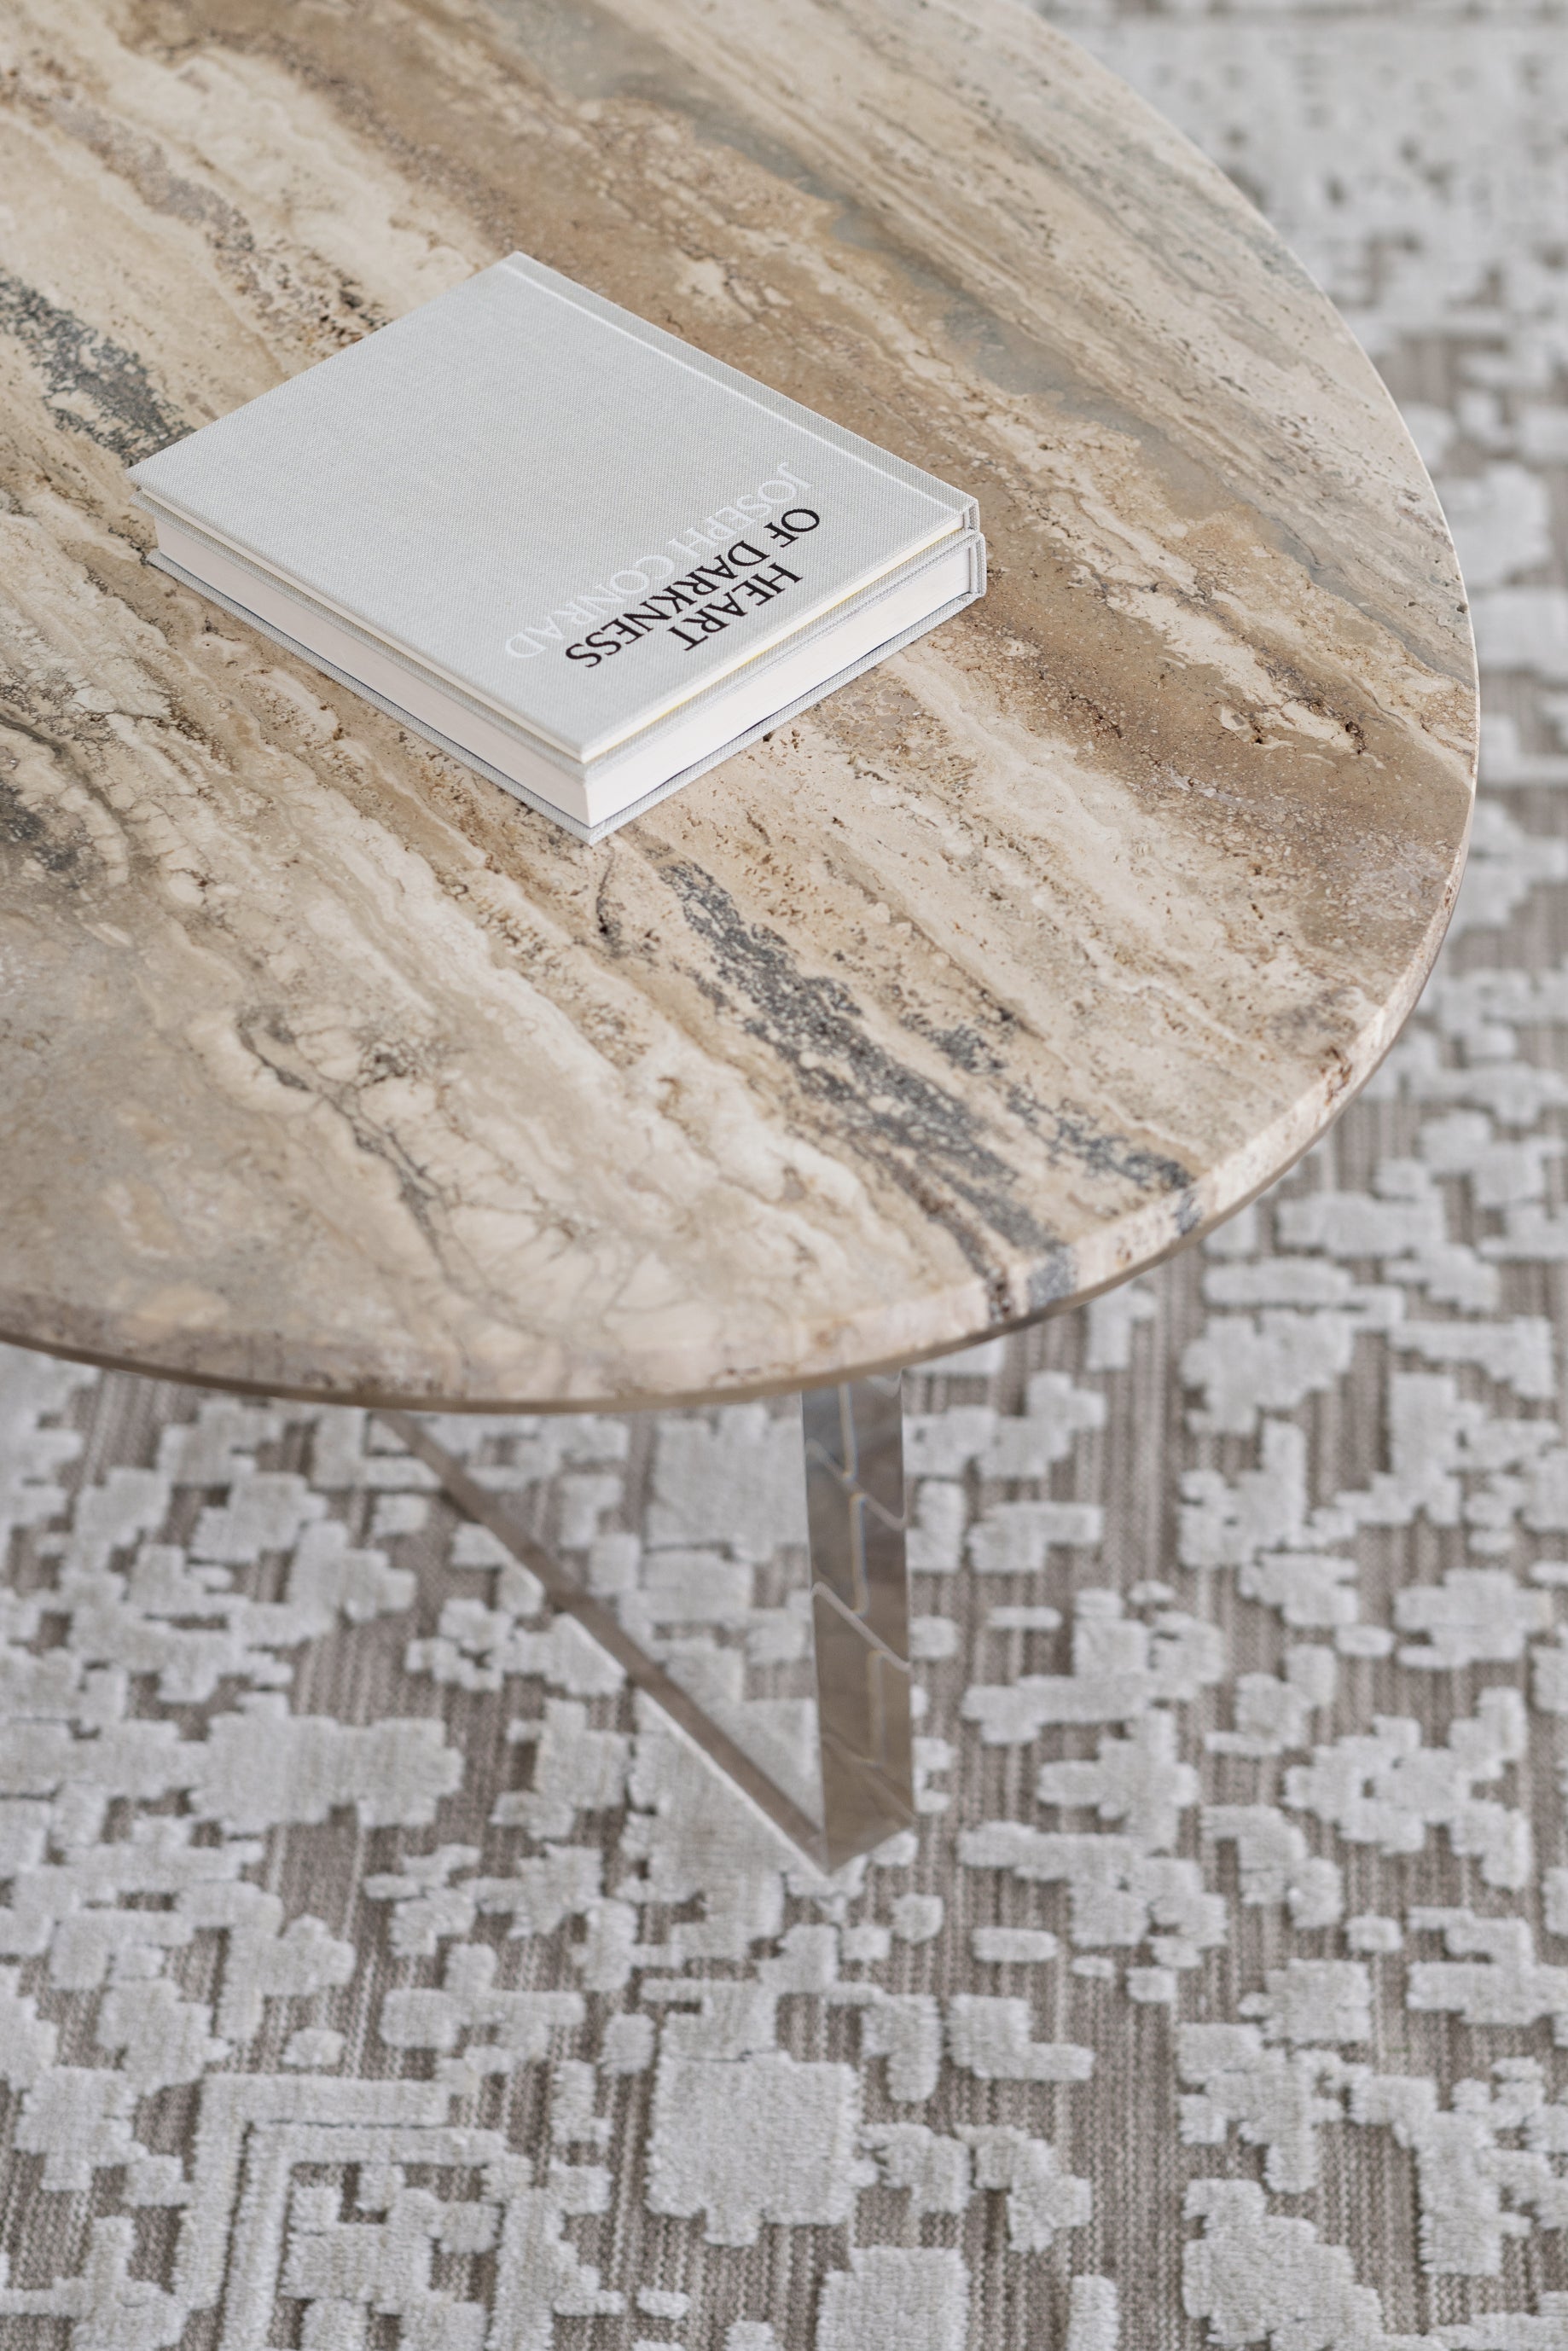 The OVAL travertine and acrylic coffee table